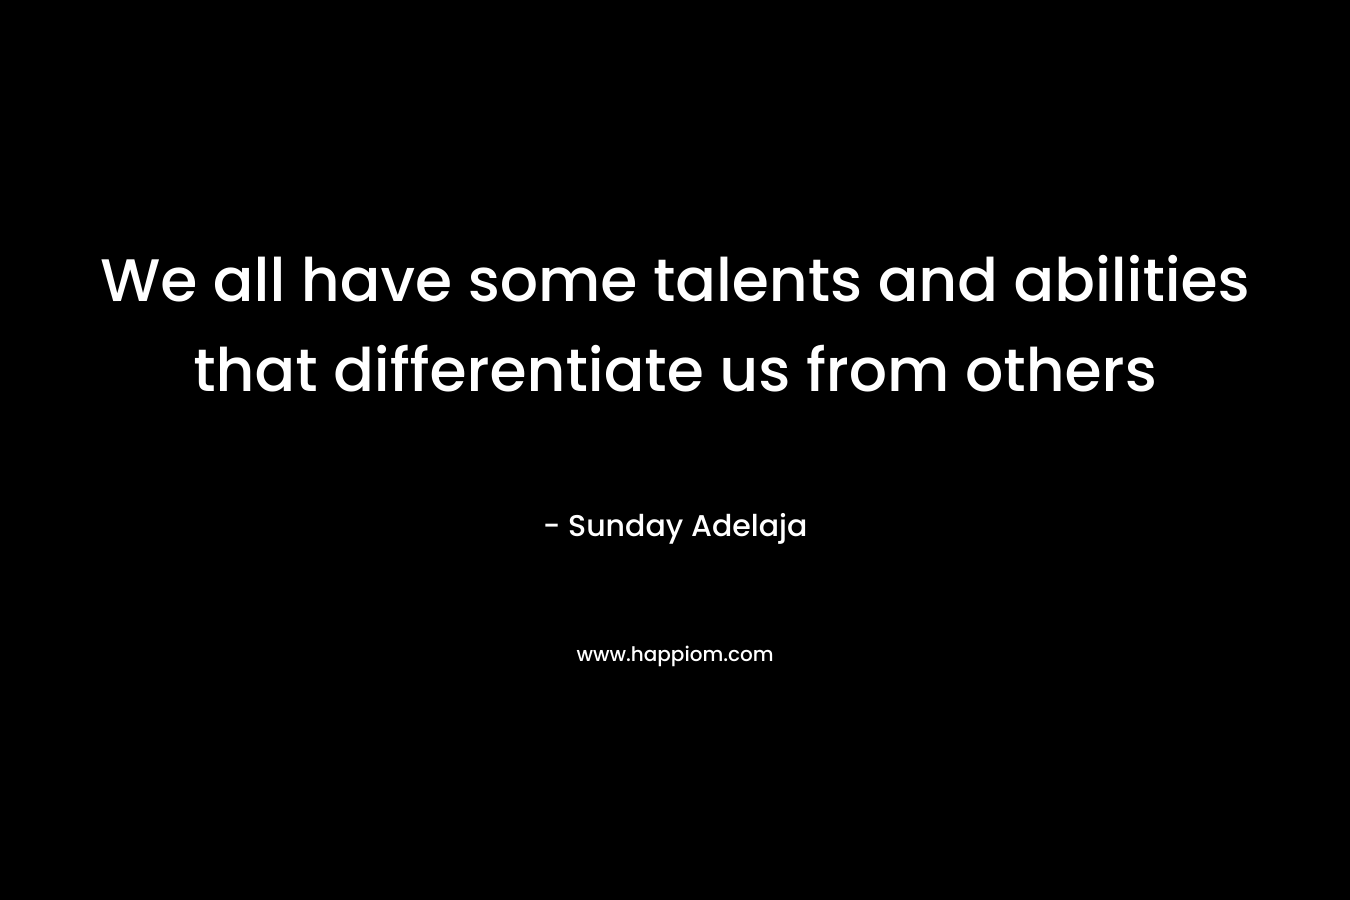 We all have some talents and abilities that differentiate us from others